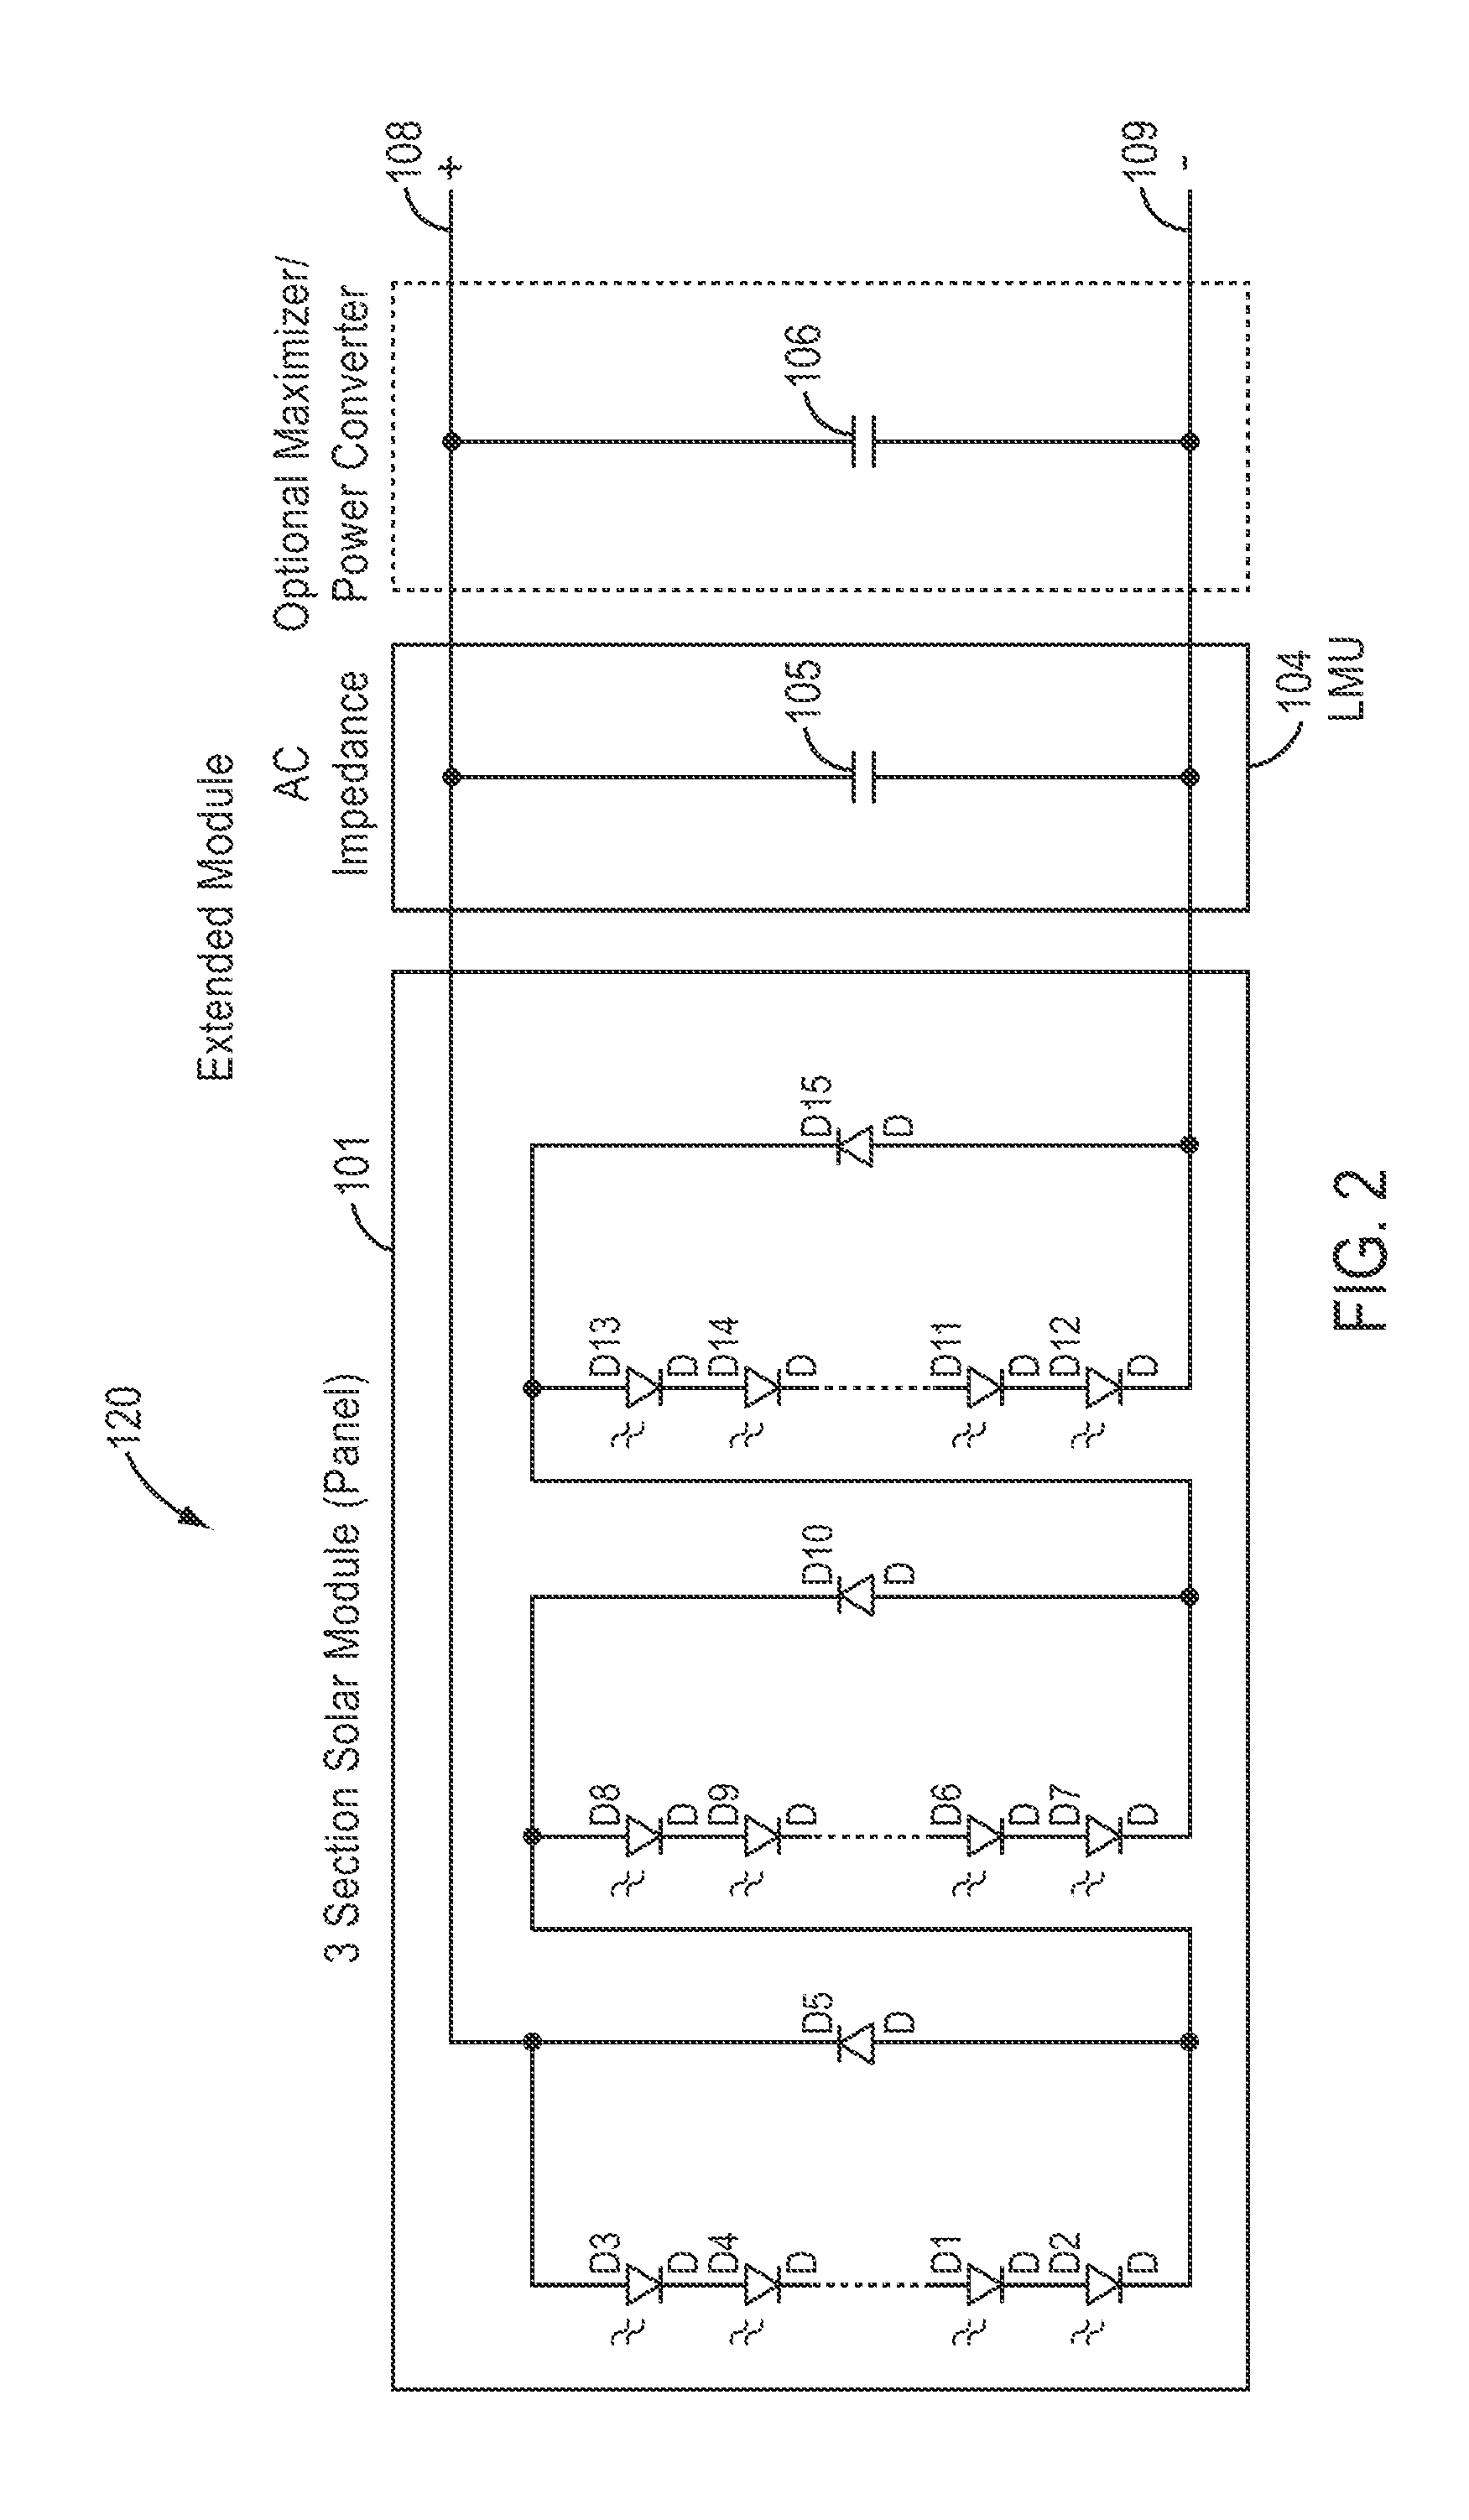 Anti-theft system and method for large solar panel systems